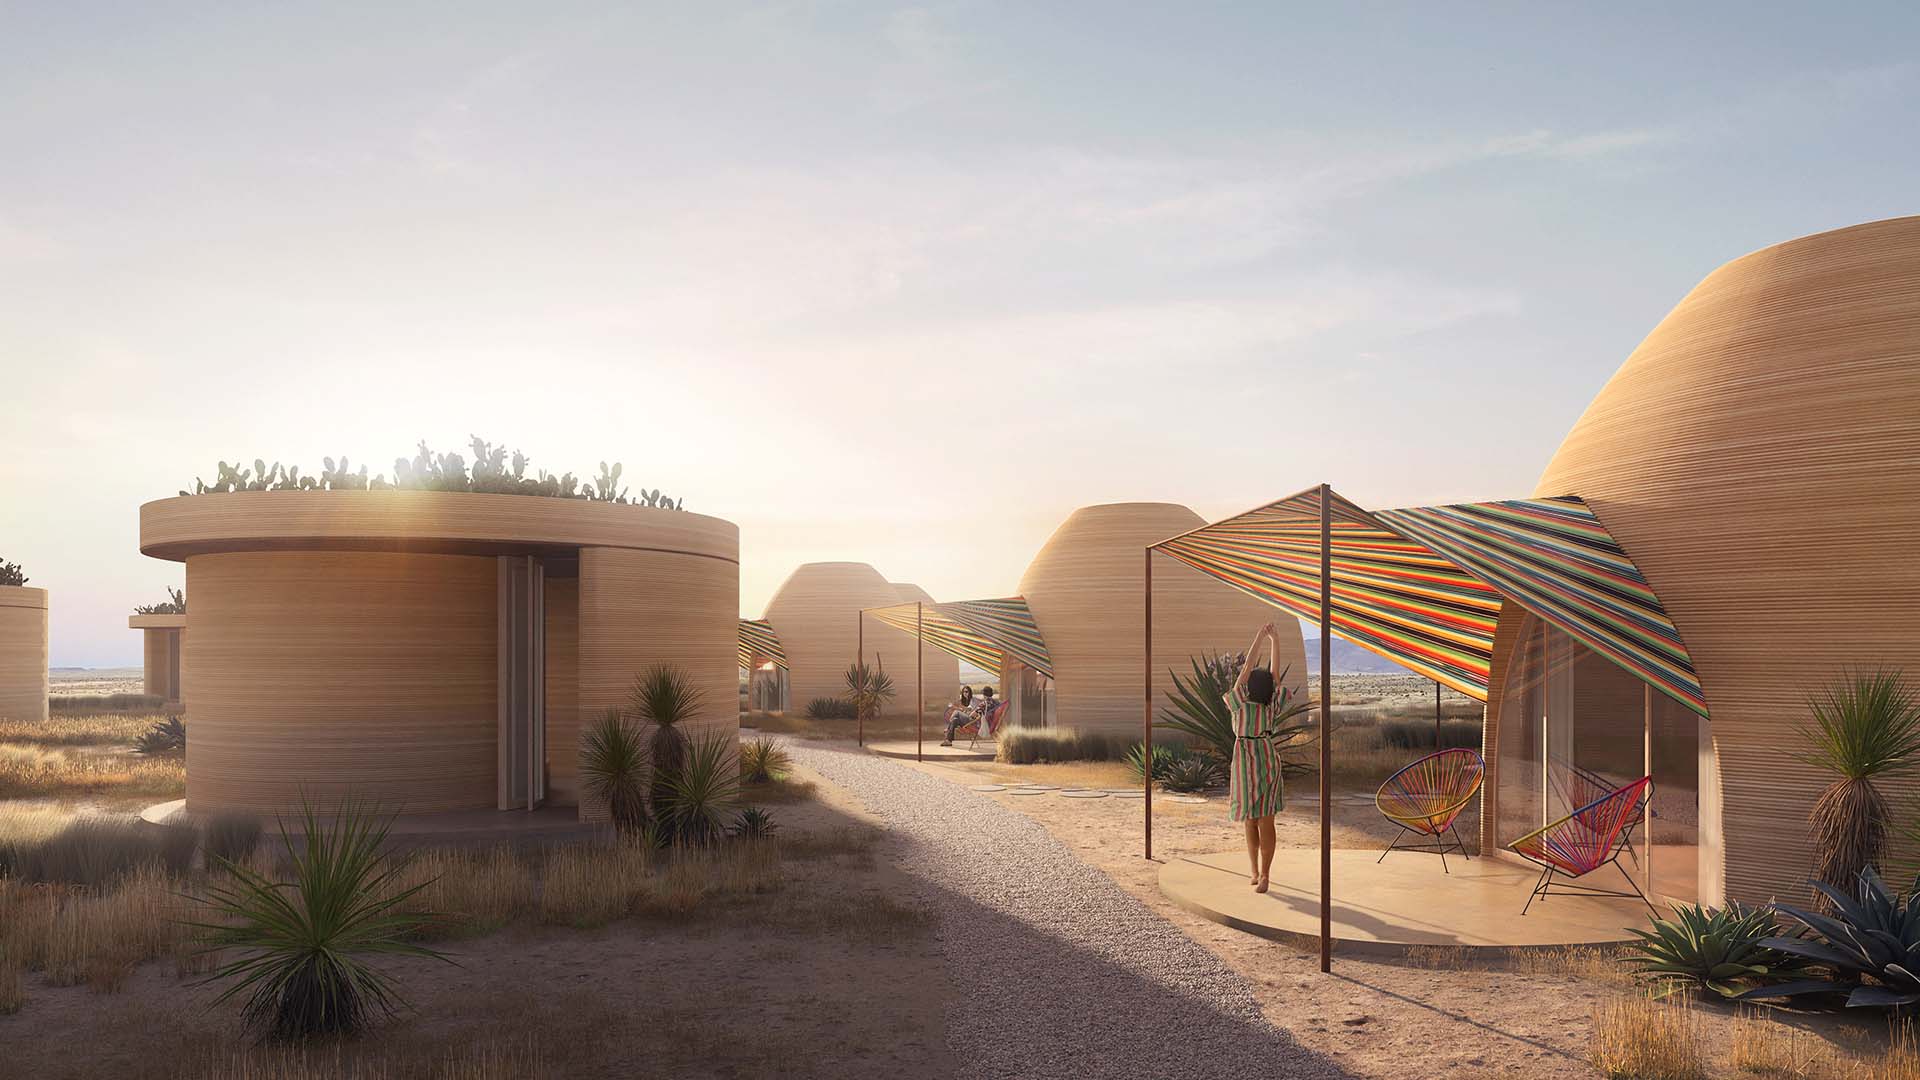 World’s First 3D-Printed Hotel, El Cosmico